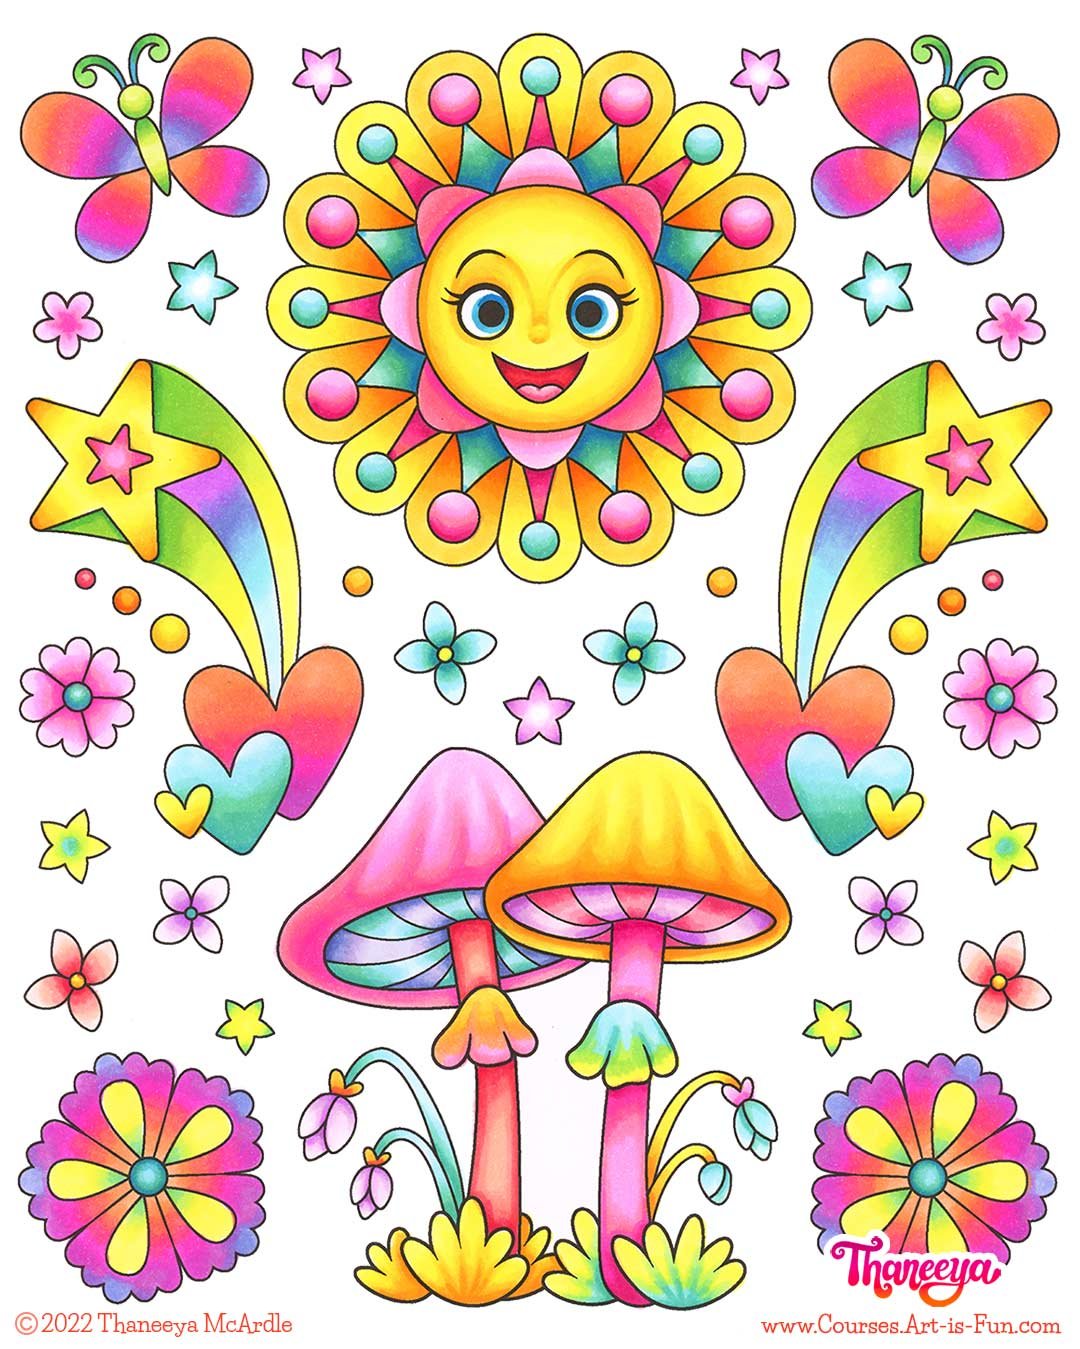 https://images.squarespace-cdn.com/content/v1/5511fc7ce4b0a3782aa9418b/1673647223333-PEIR8YAD8HHJ2DRTL6OK/Printable-coloring-page-from-Ultimate-Guide-to-Using-Alcohol-Markers-by-Thaneeya-McArdle.jpg